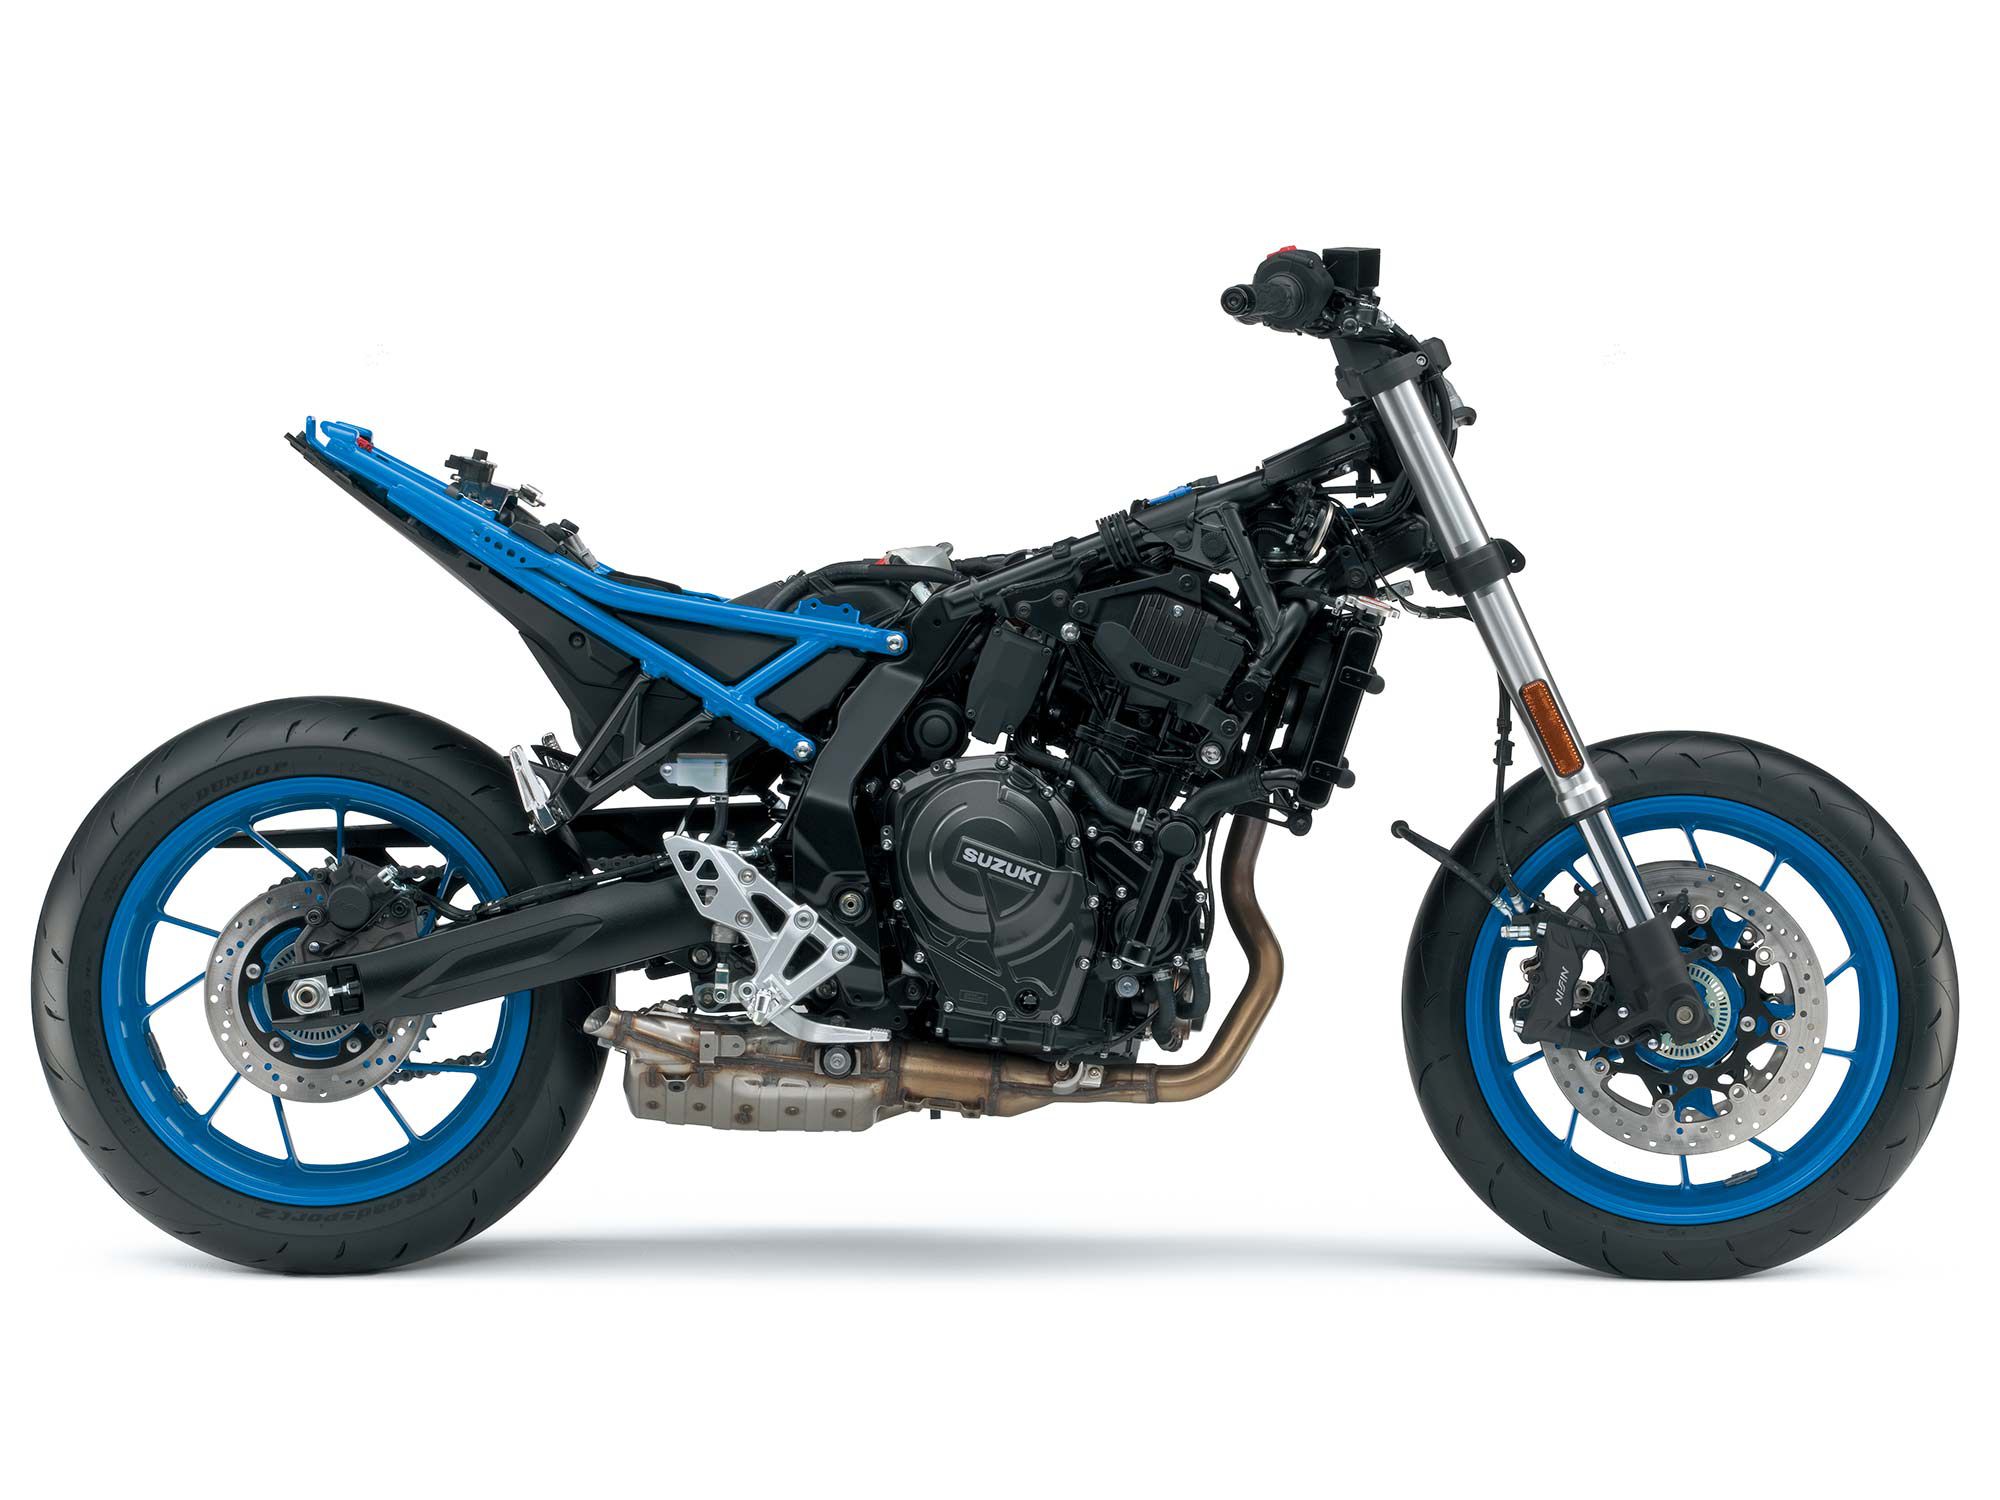 Suzuki Motor shows off its new parallel-twin-powered four-stroke internal combustion gasoline engine that will power new 2023 motorcycles and beyond.